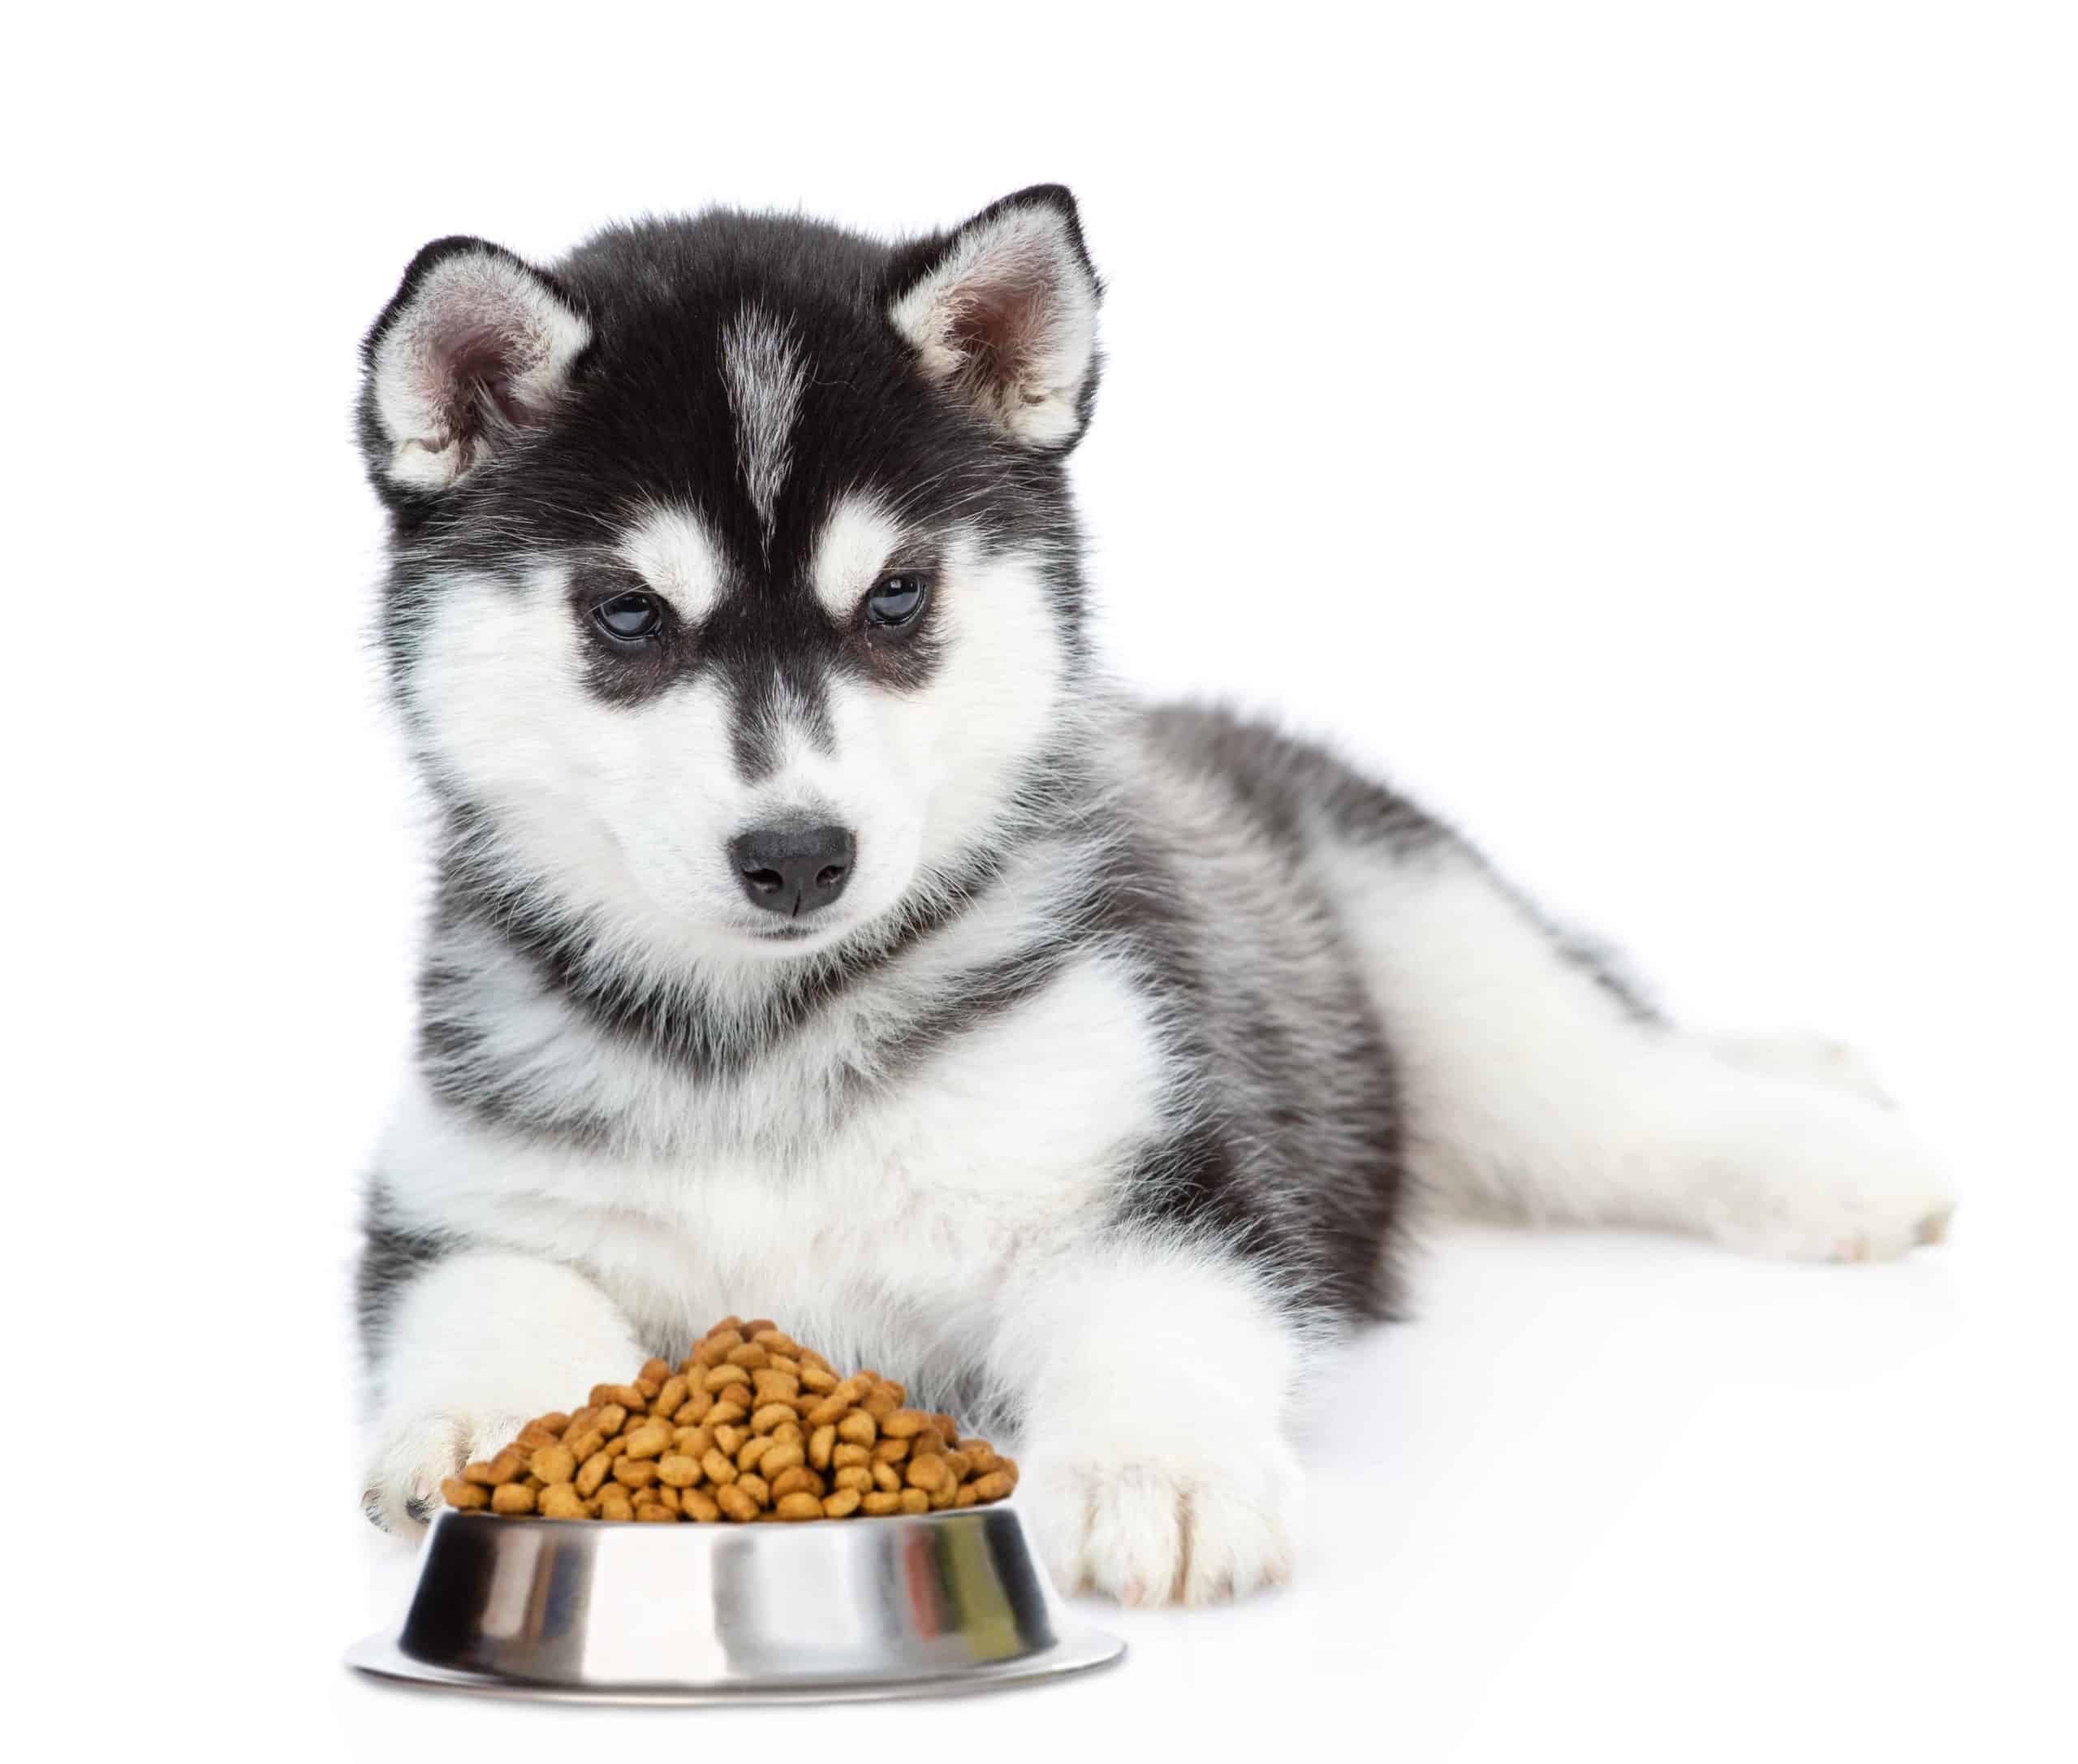 Siberian Husky with bowl filled with kibble. To protect your puppy, feed him a healthy diet and make sure he eats the food you provide instead of chewing on your shoes, electric cords, or houseplants.